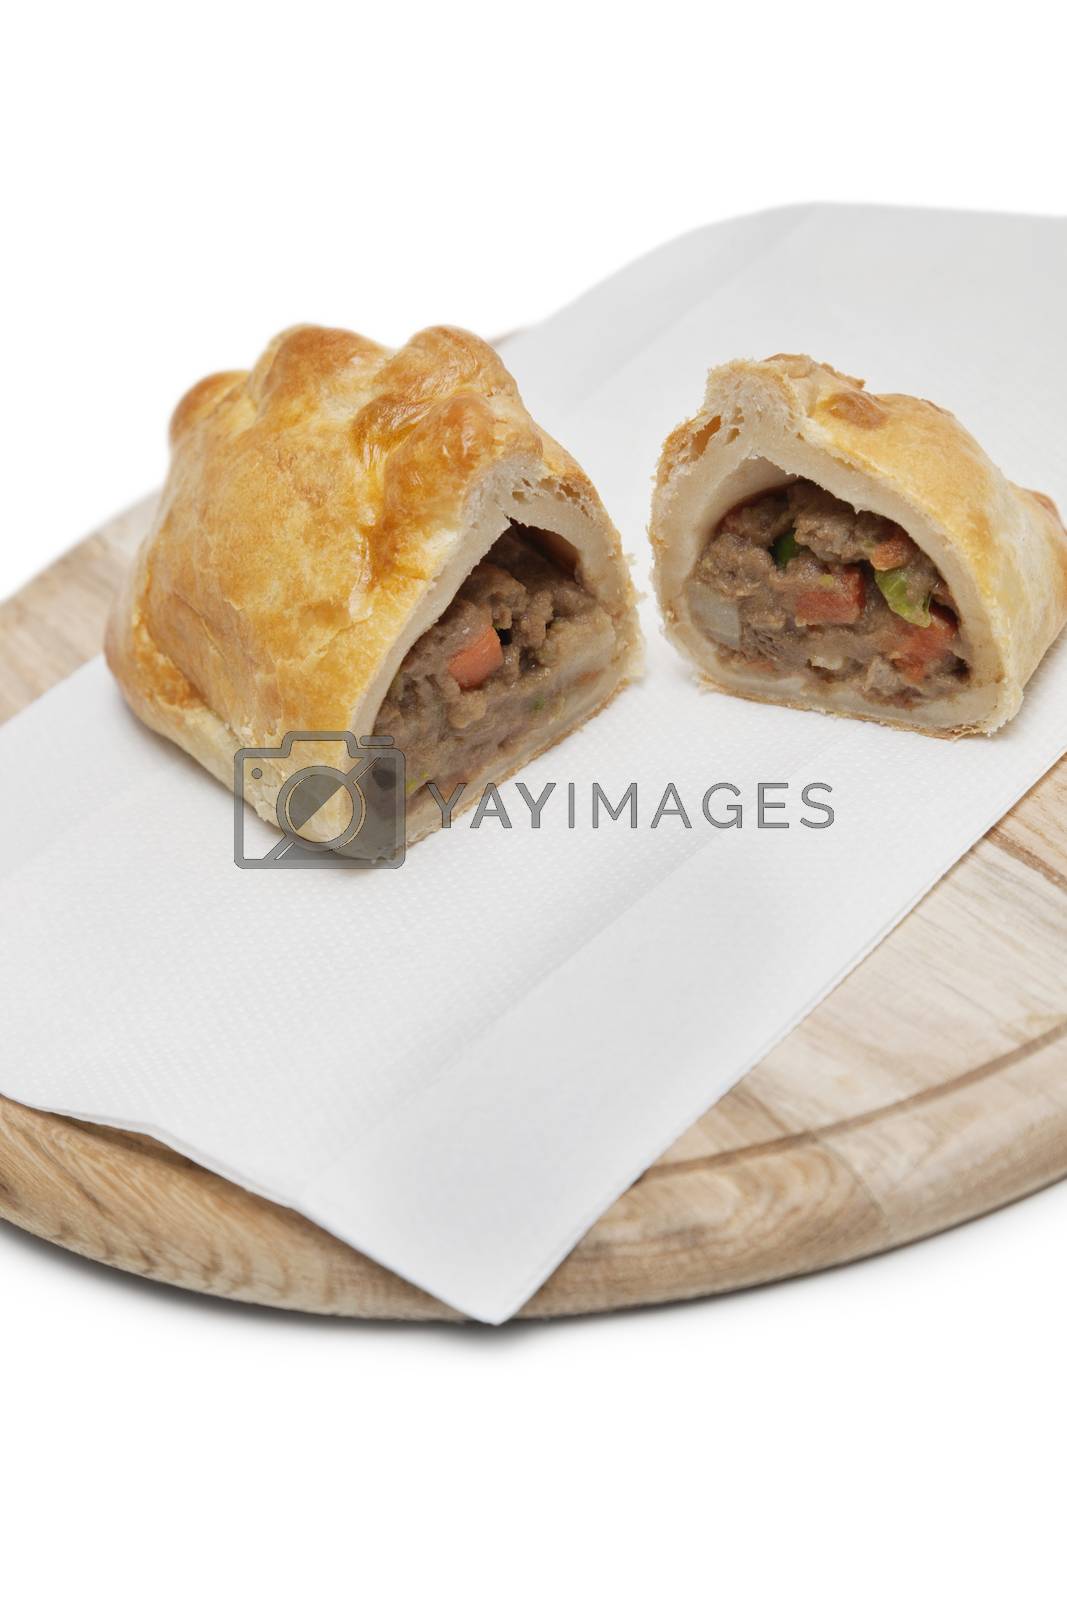 Royalty free image of Two pieces of Cornish pastry and tissue on wooden plate by moodboard